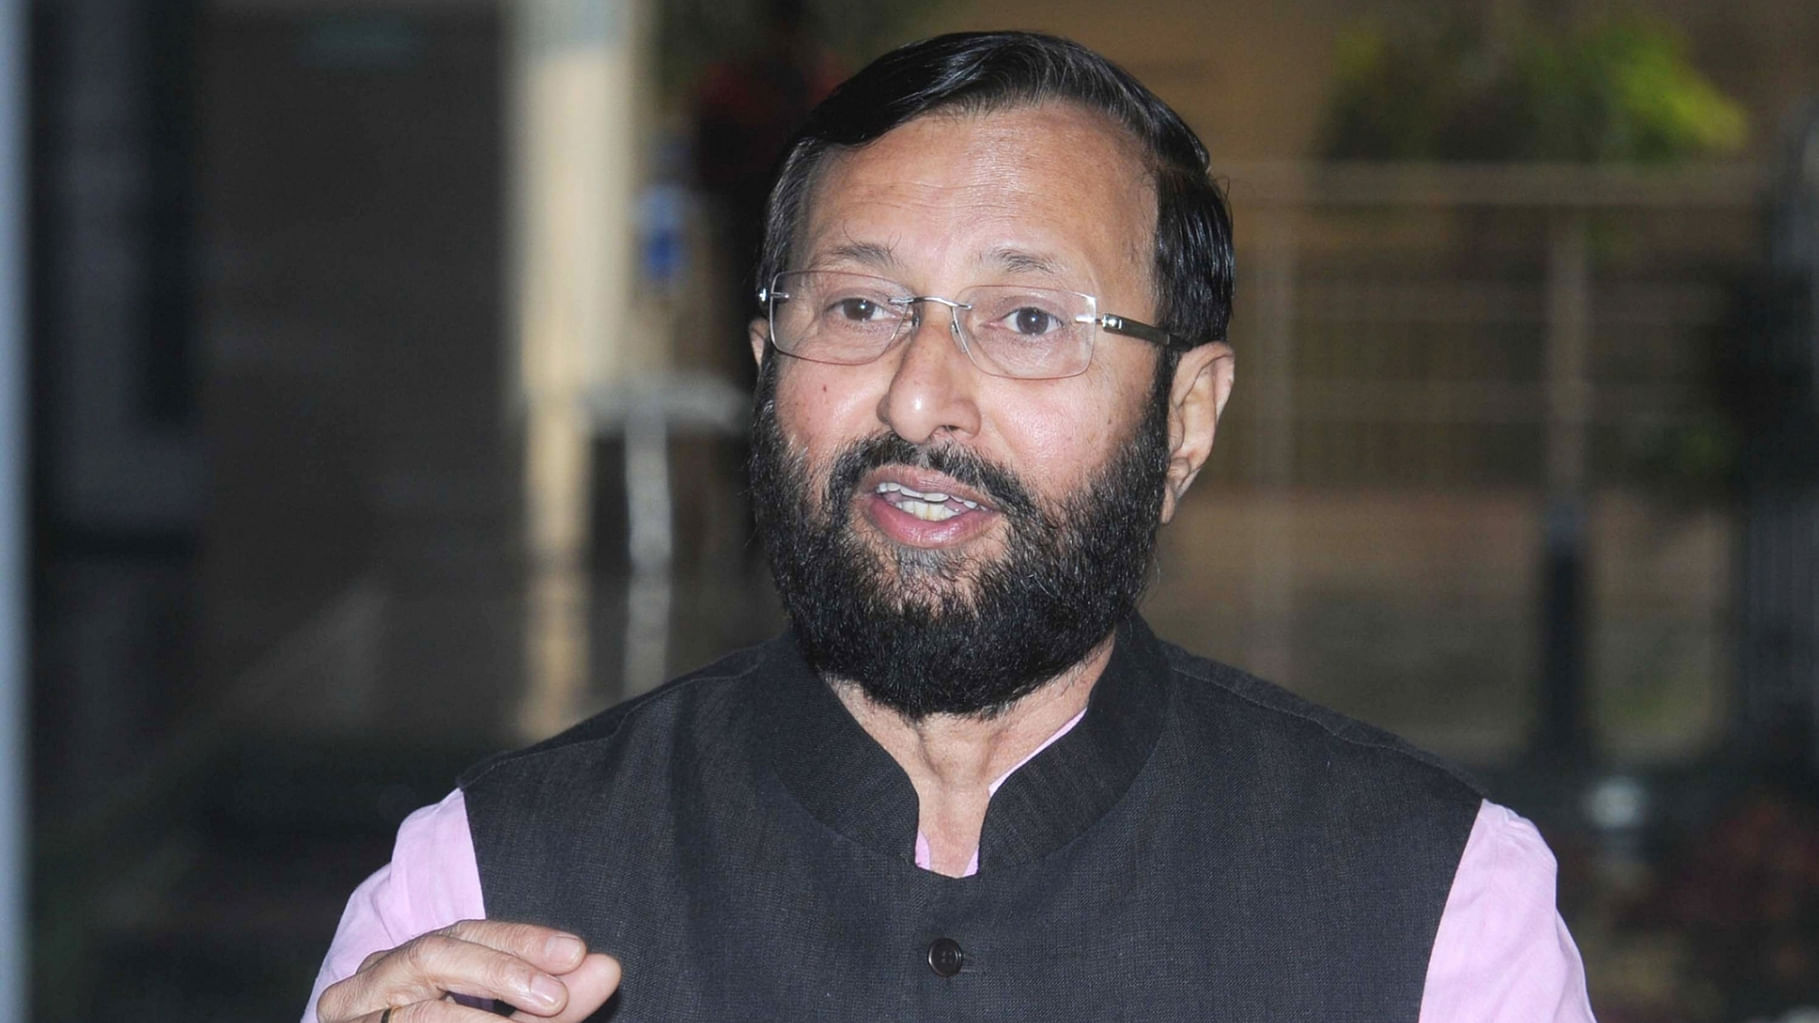 HRD Minister Prakash Javadekar said the draft policy will be reviewed after winter session of Parliament ends.